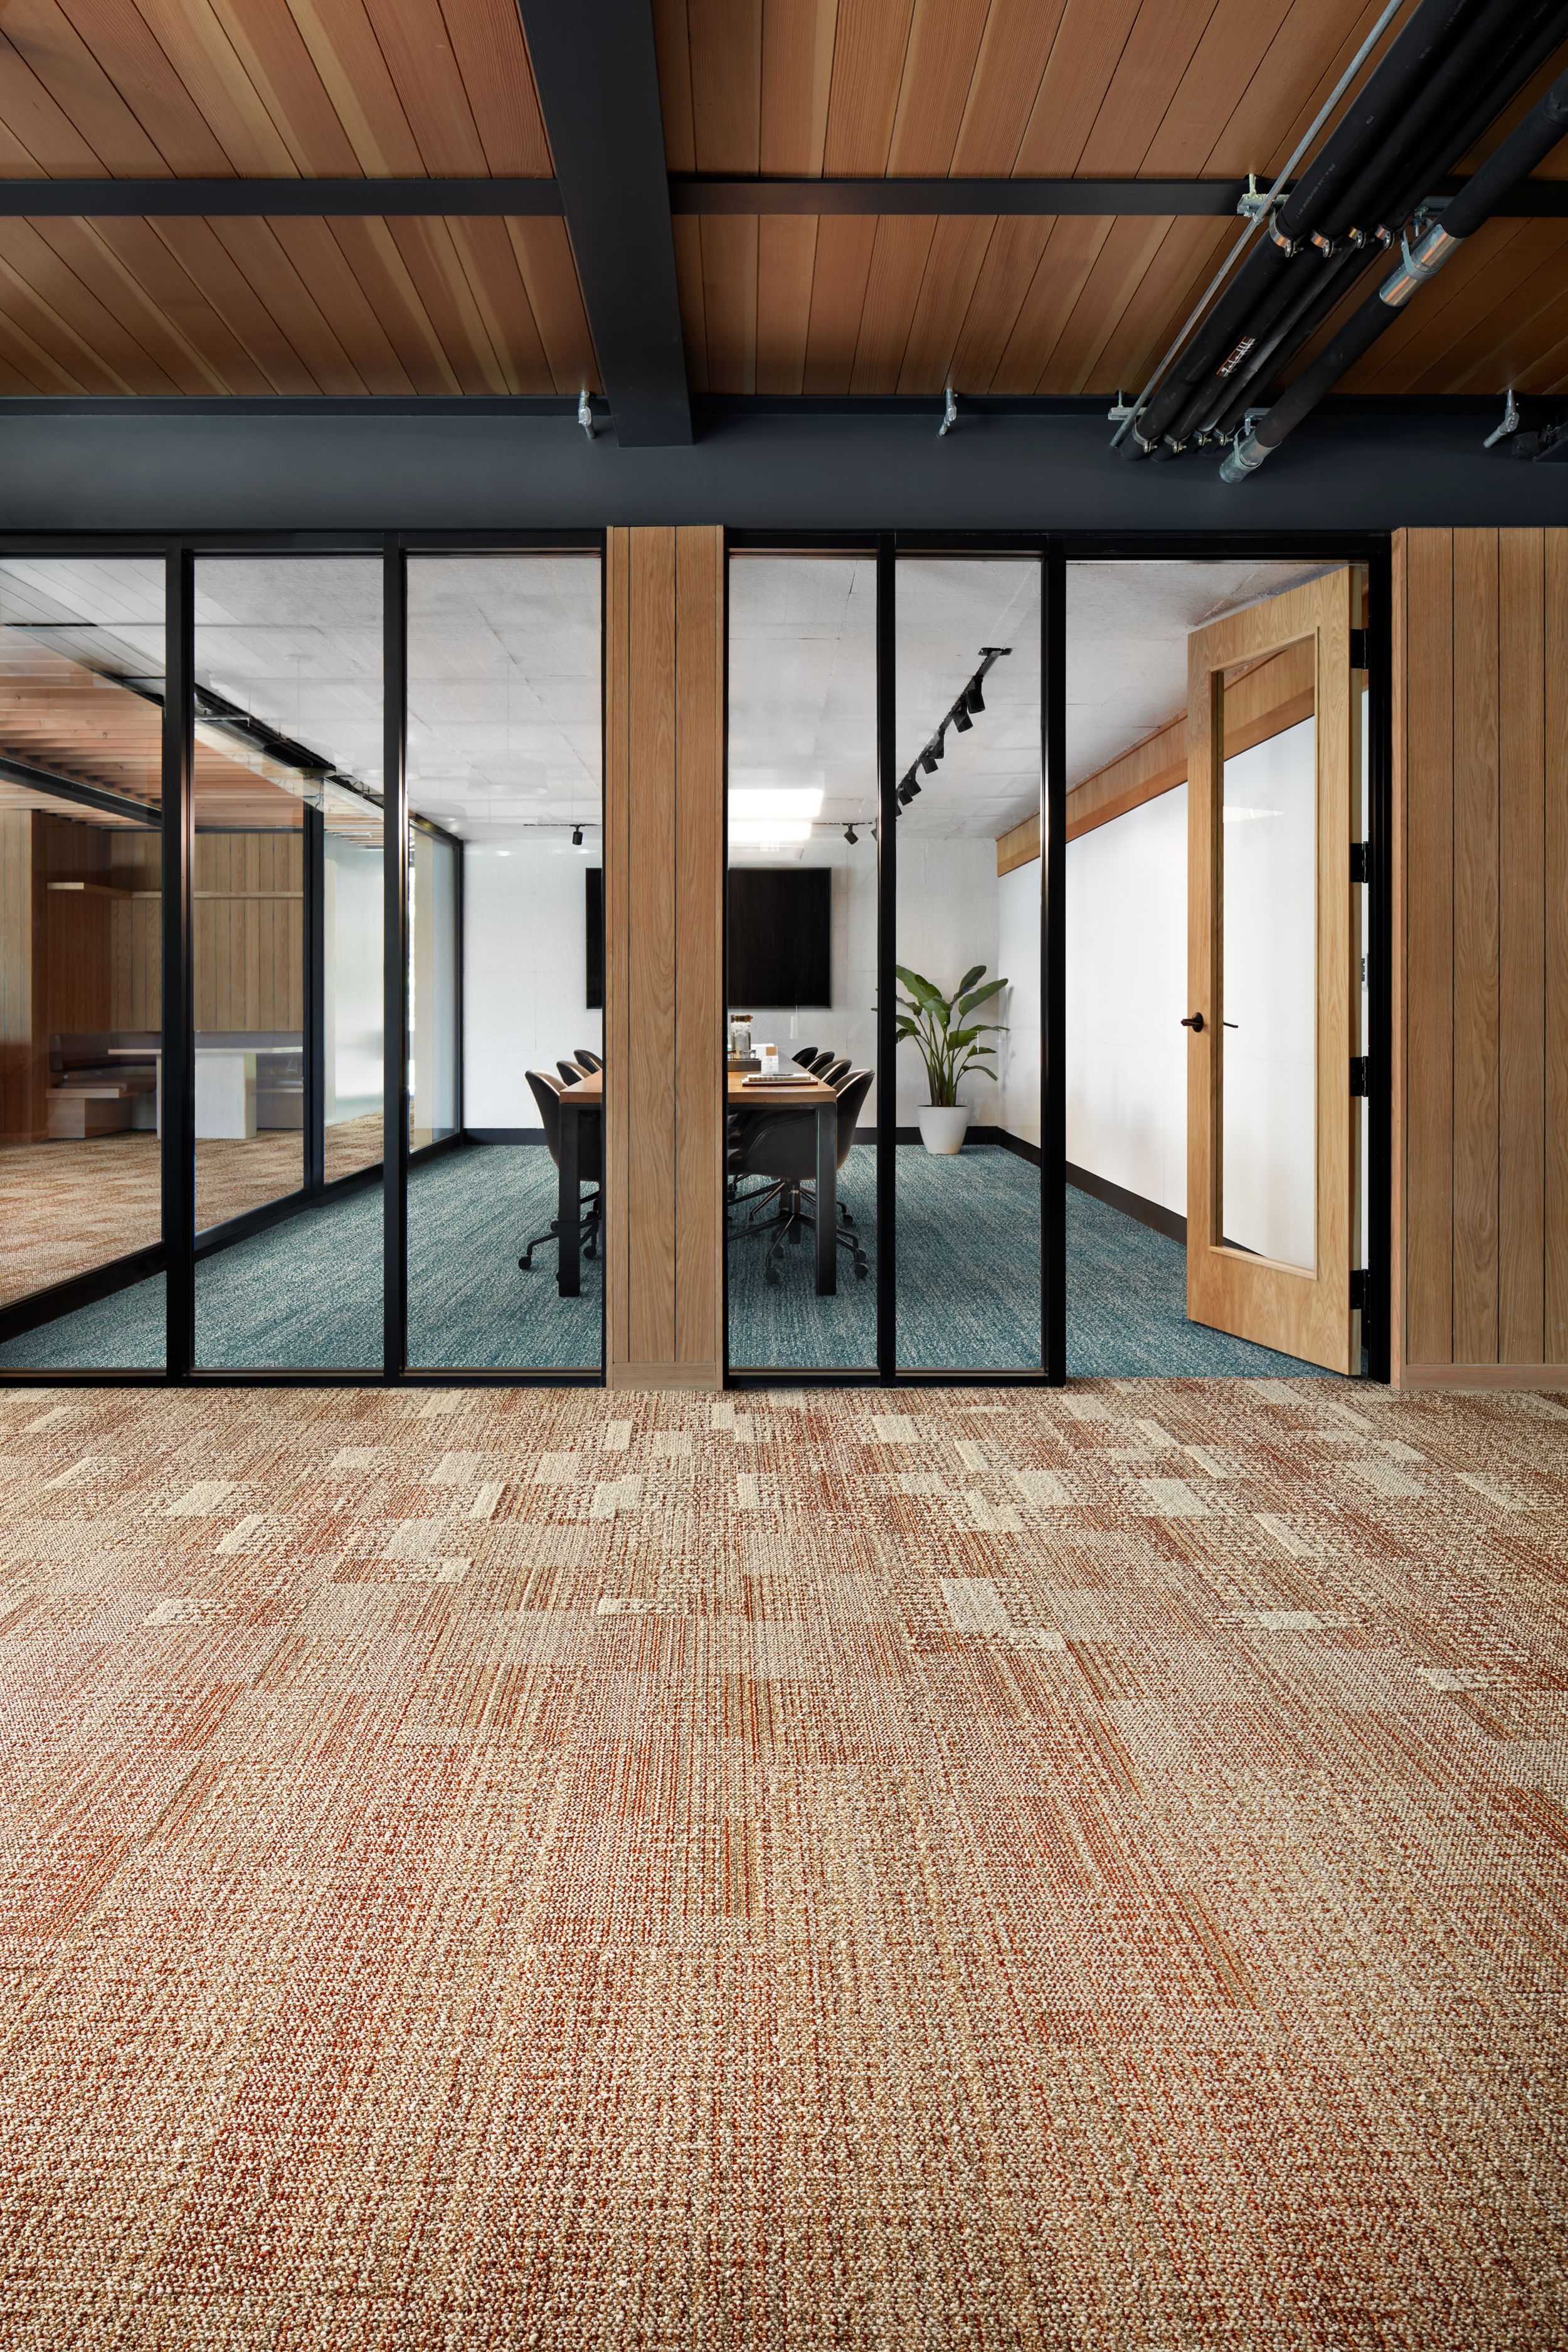 Interface Dot 2 Dot, Dot O-Mine and Diddley Dot plank carpet tile in meeting room image number 7